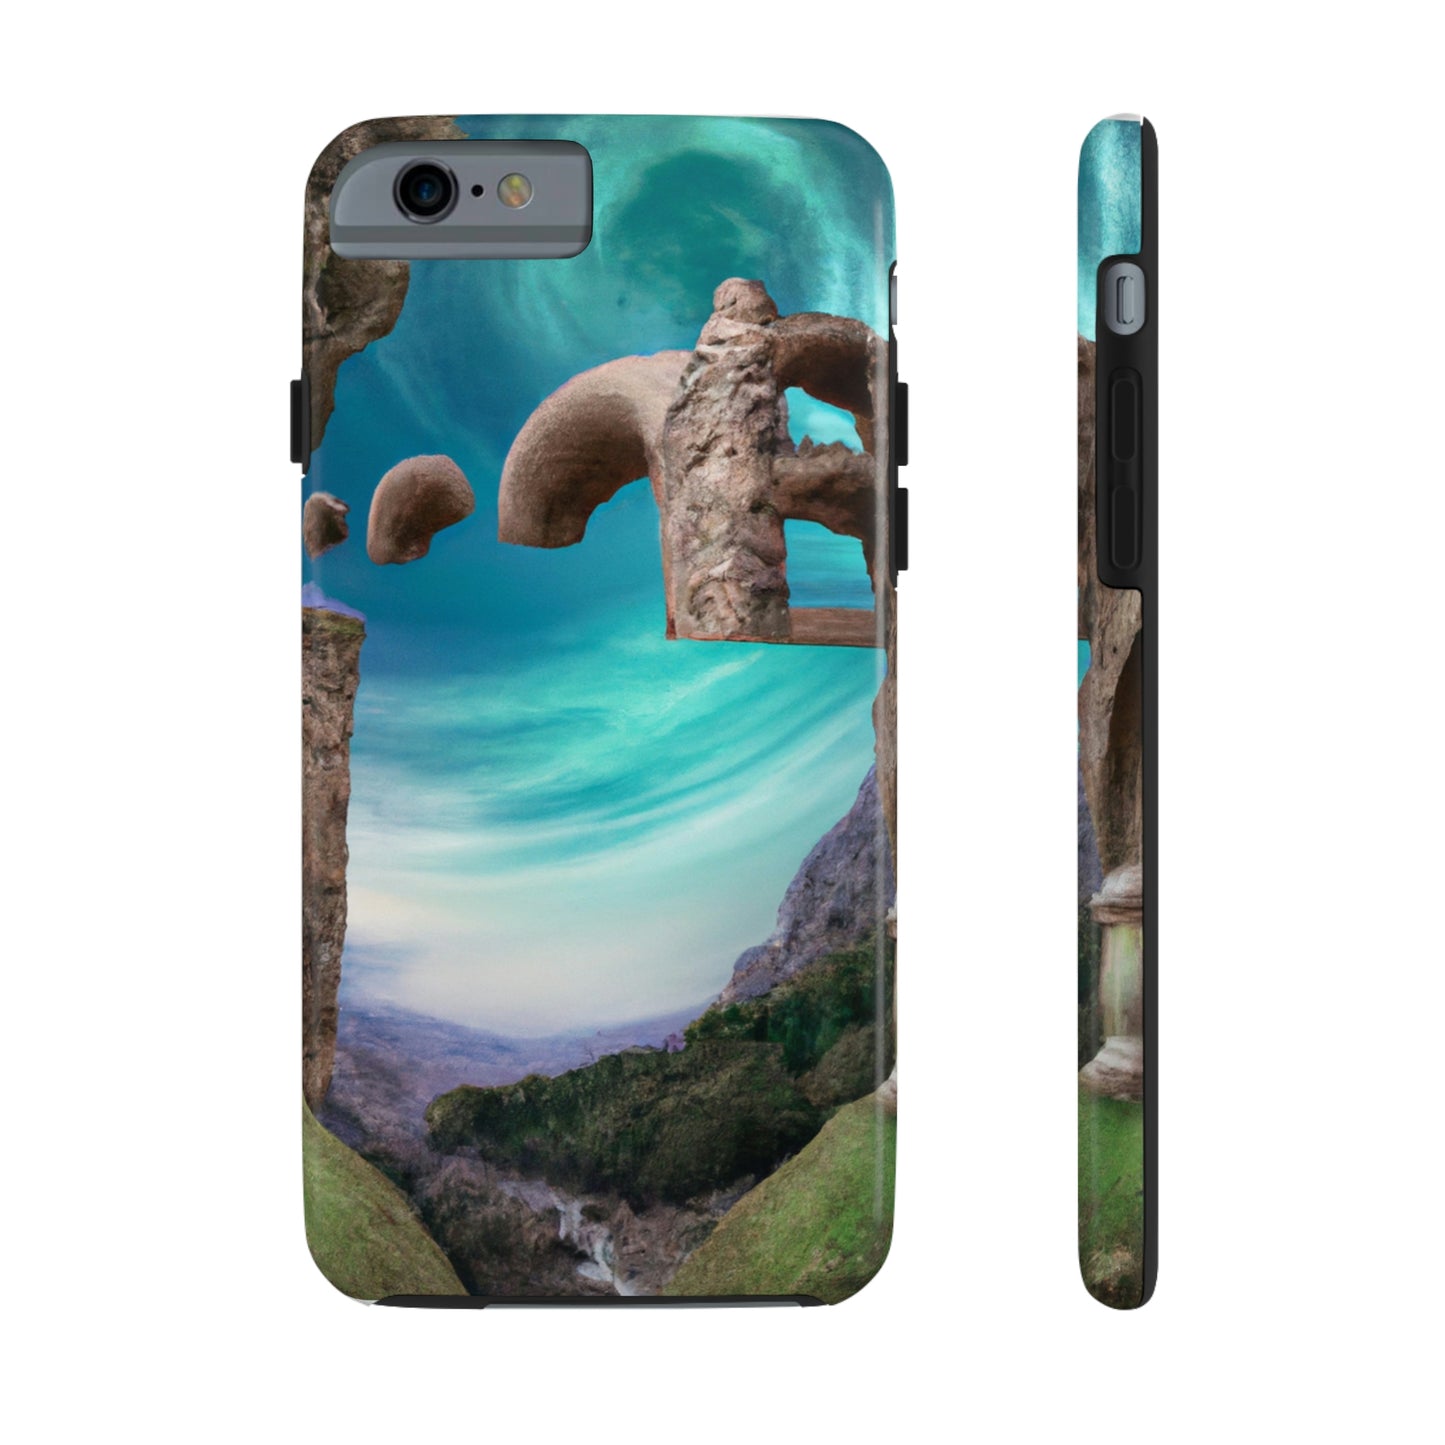 "The Forgotten Valley: Lost in the Ancients" - The Alien Tough Phone Cases